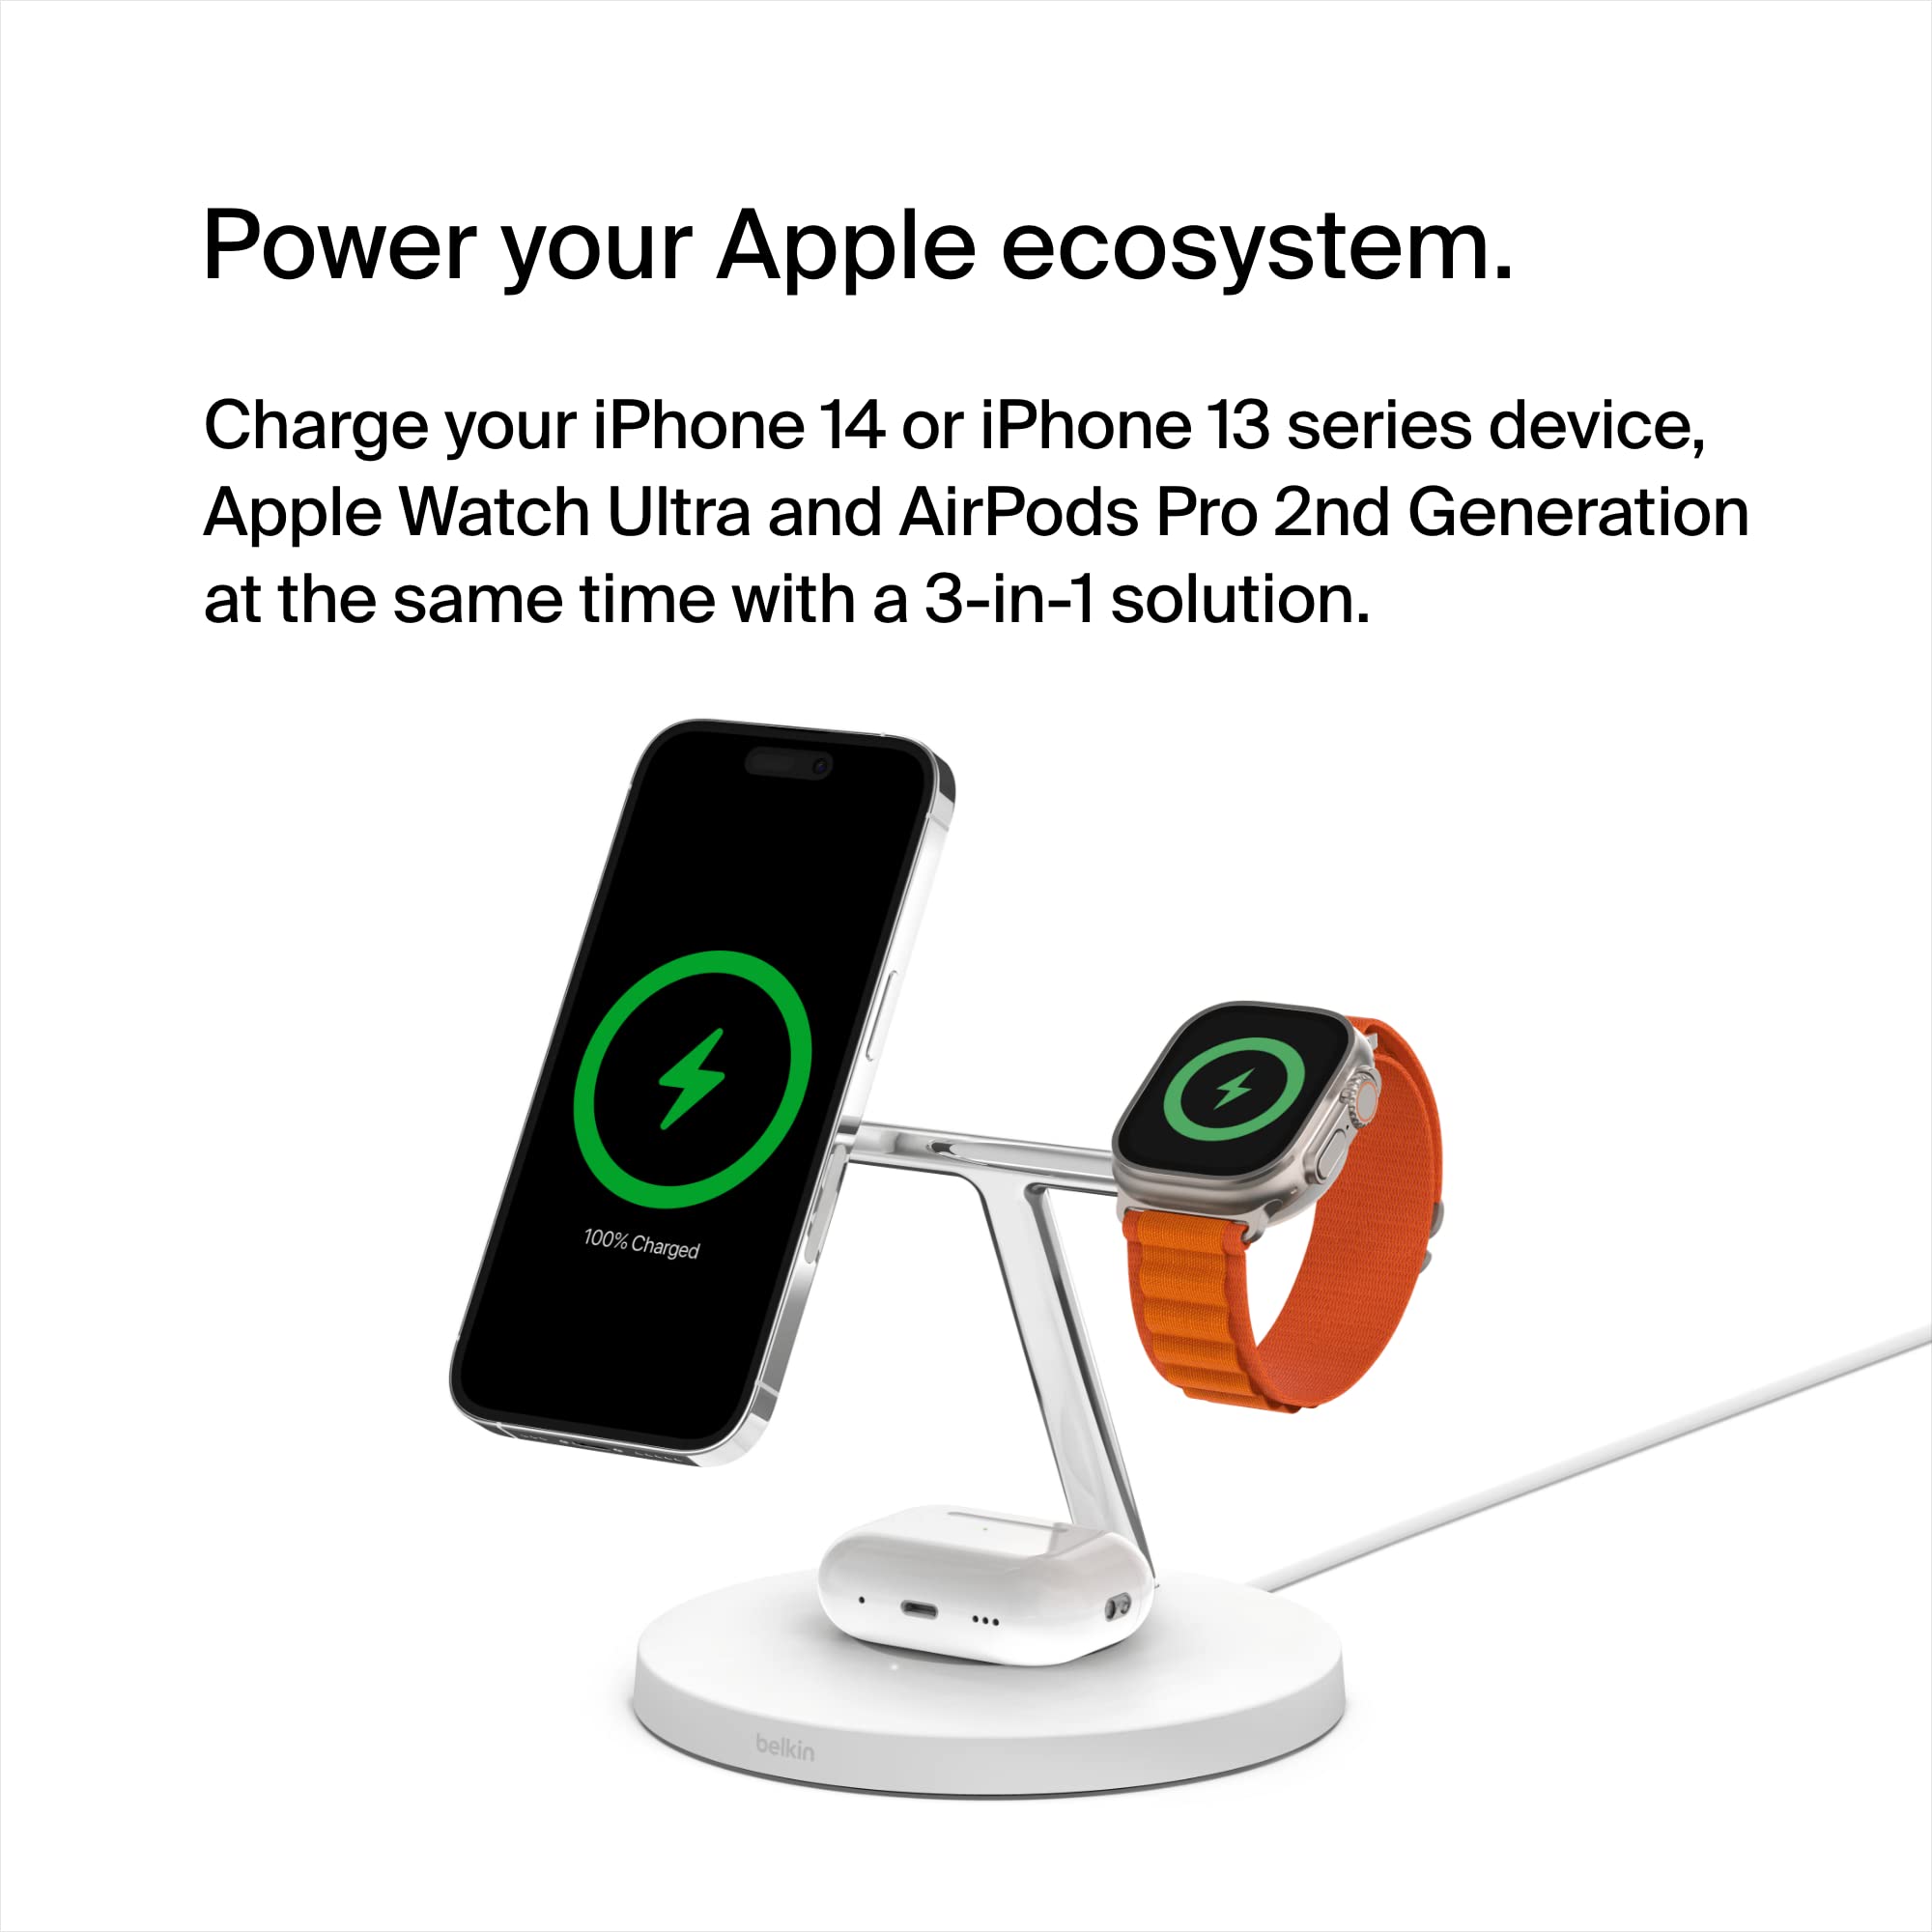 Belkin MagSafe 3-in-1 Wireless Charging Stand - 2ND GEN w/ 33% Faster Wireless Charging for Apple Watch - iPhone 15, 14 & 13 Series, & AirPods $122.75 - Free shipping w/ Prime